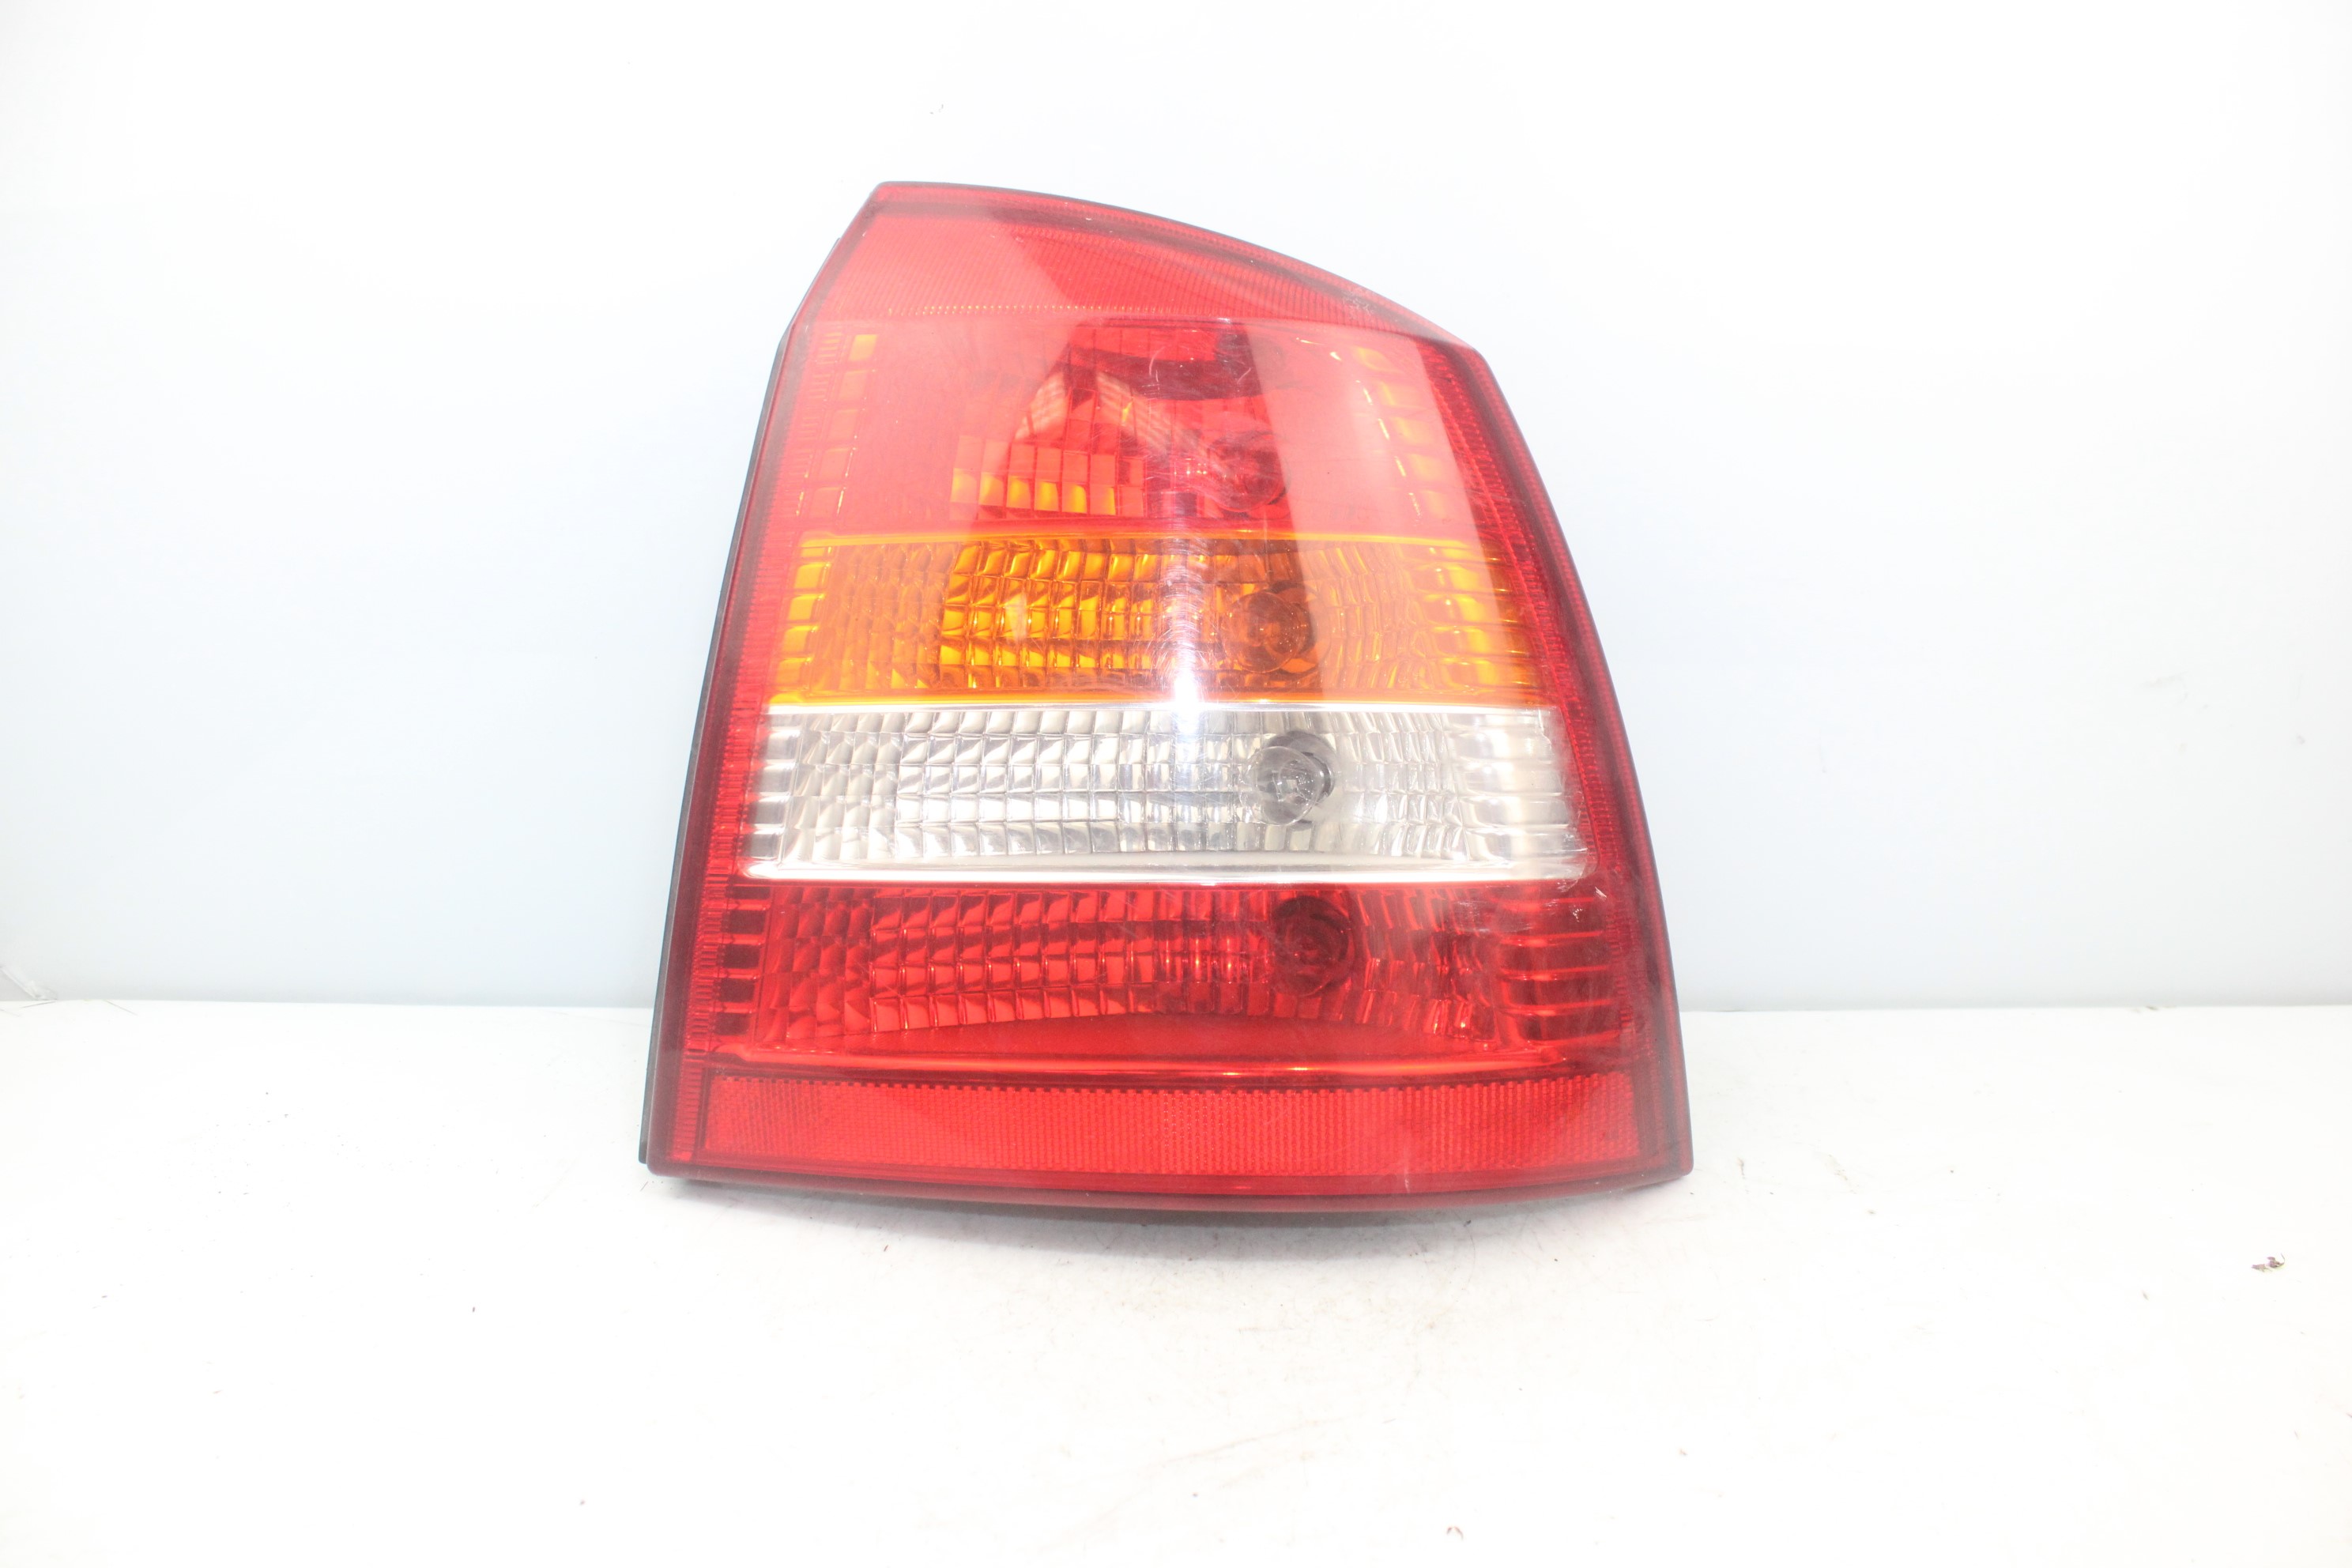 OPEL Astra H (2004-2014) Rear Right Taillight Lamp 290502 23838093